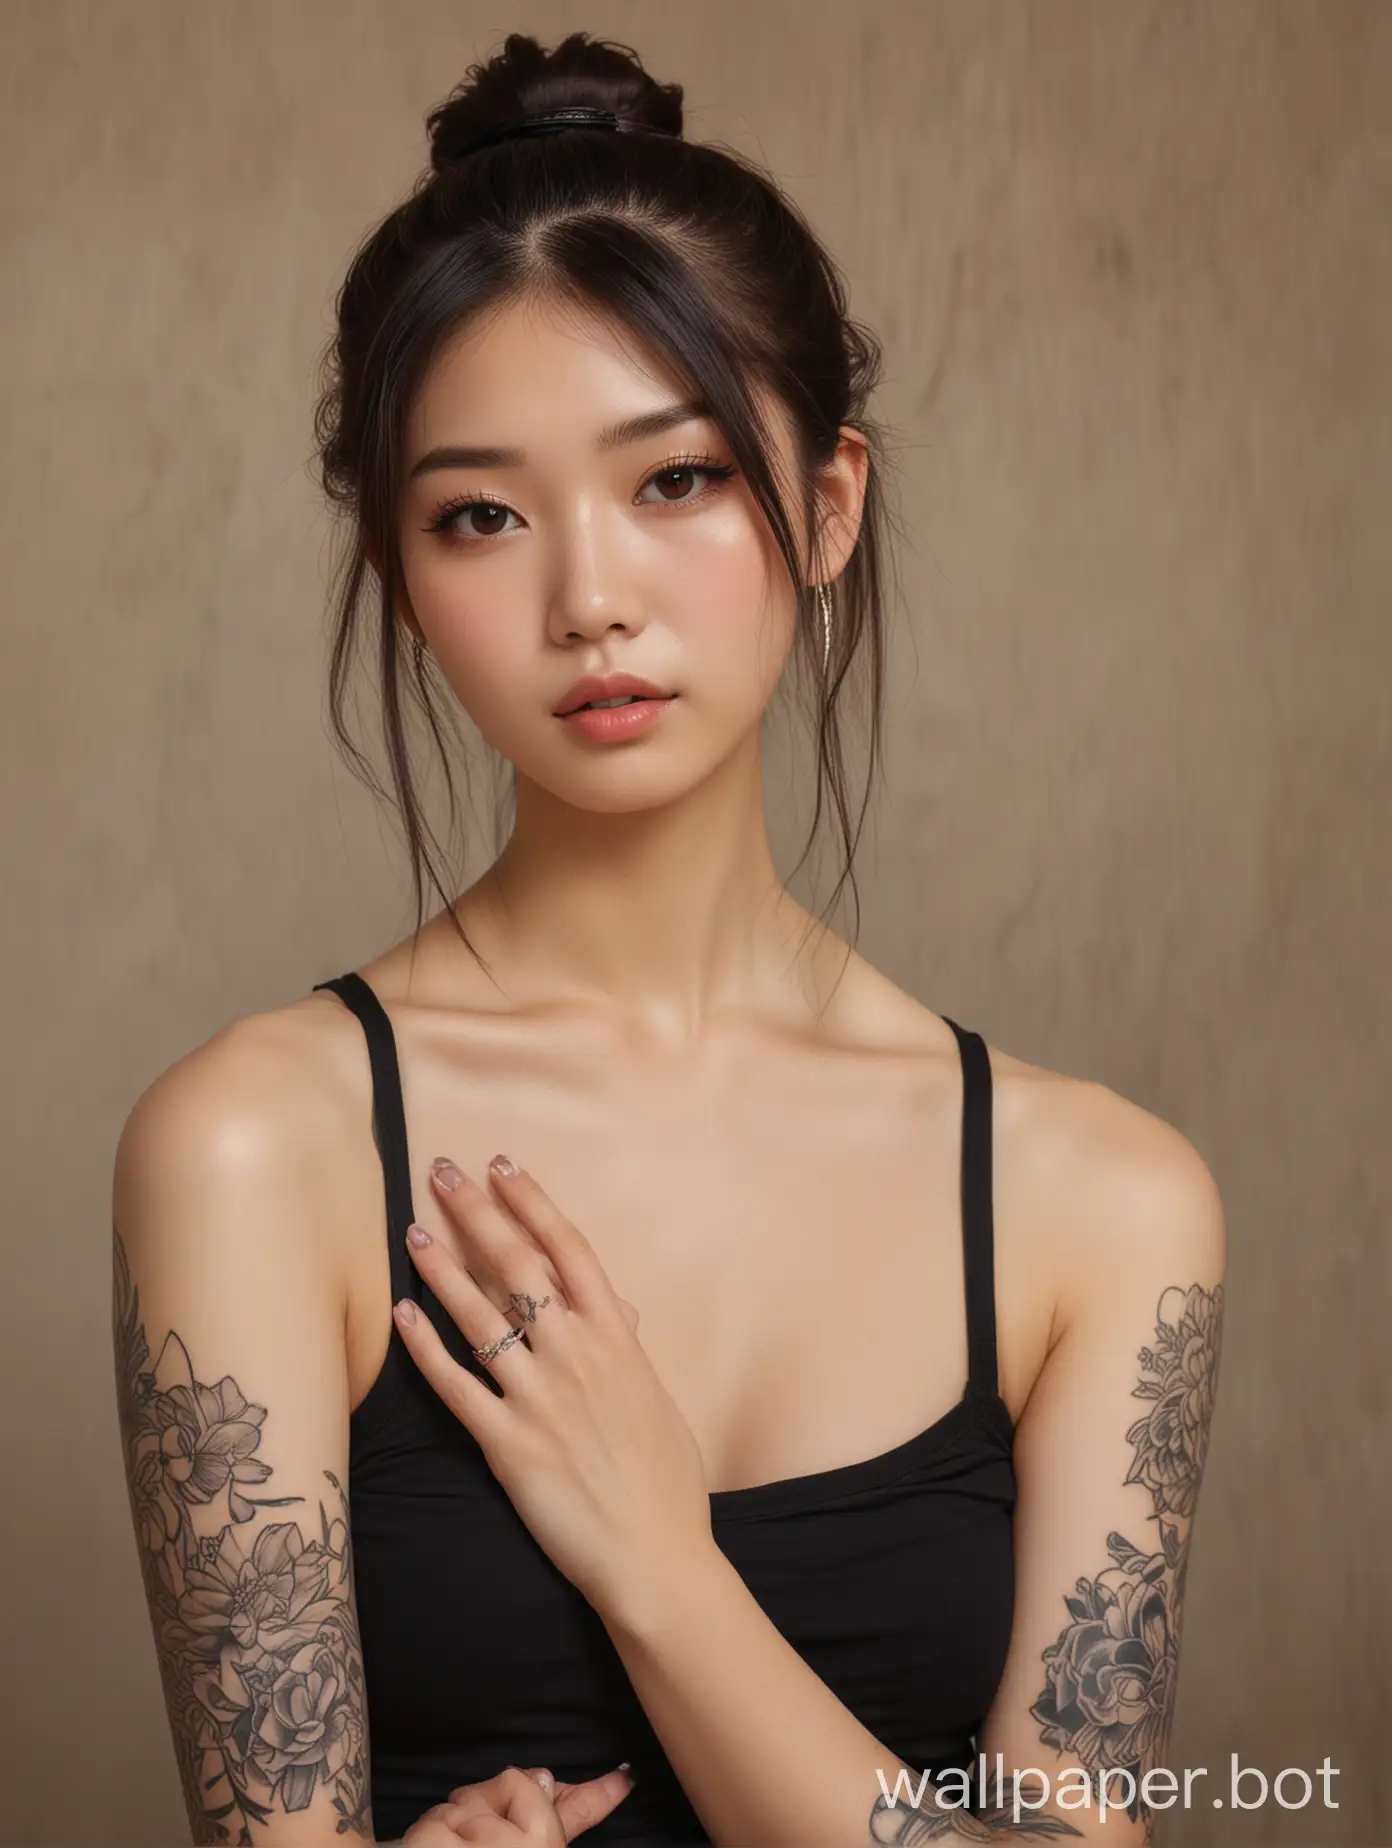 Elegant-Japanese-Woman-Portrayal-in-Oil-Painting-Style-with-Tattoos-and-Silver-Accessories